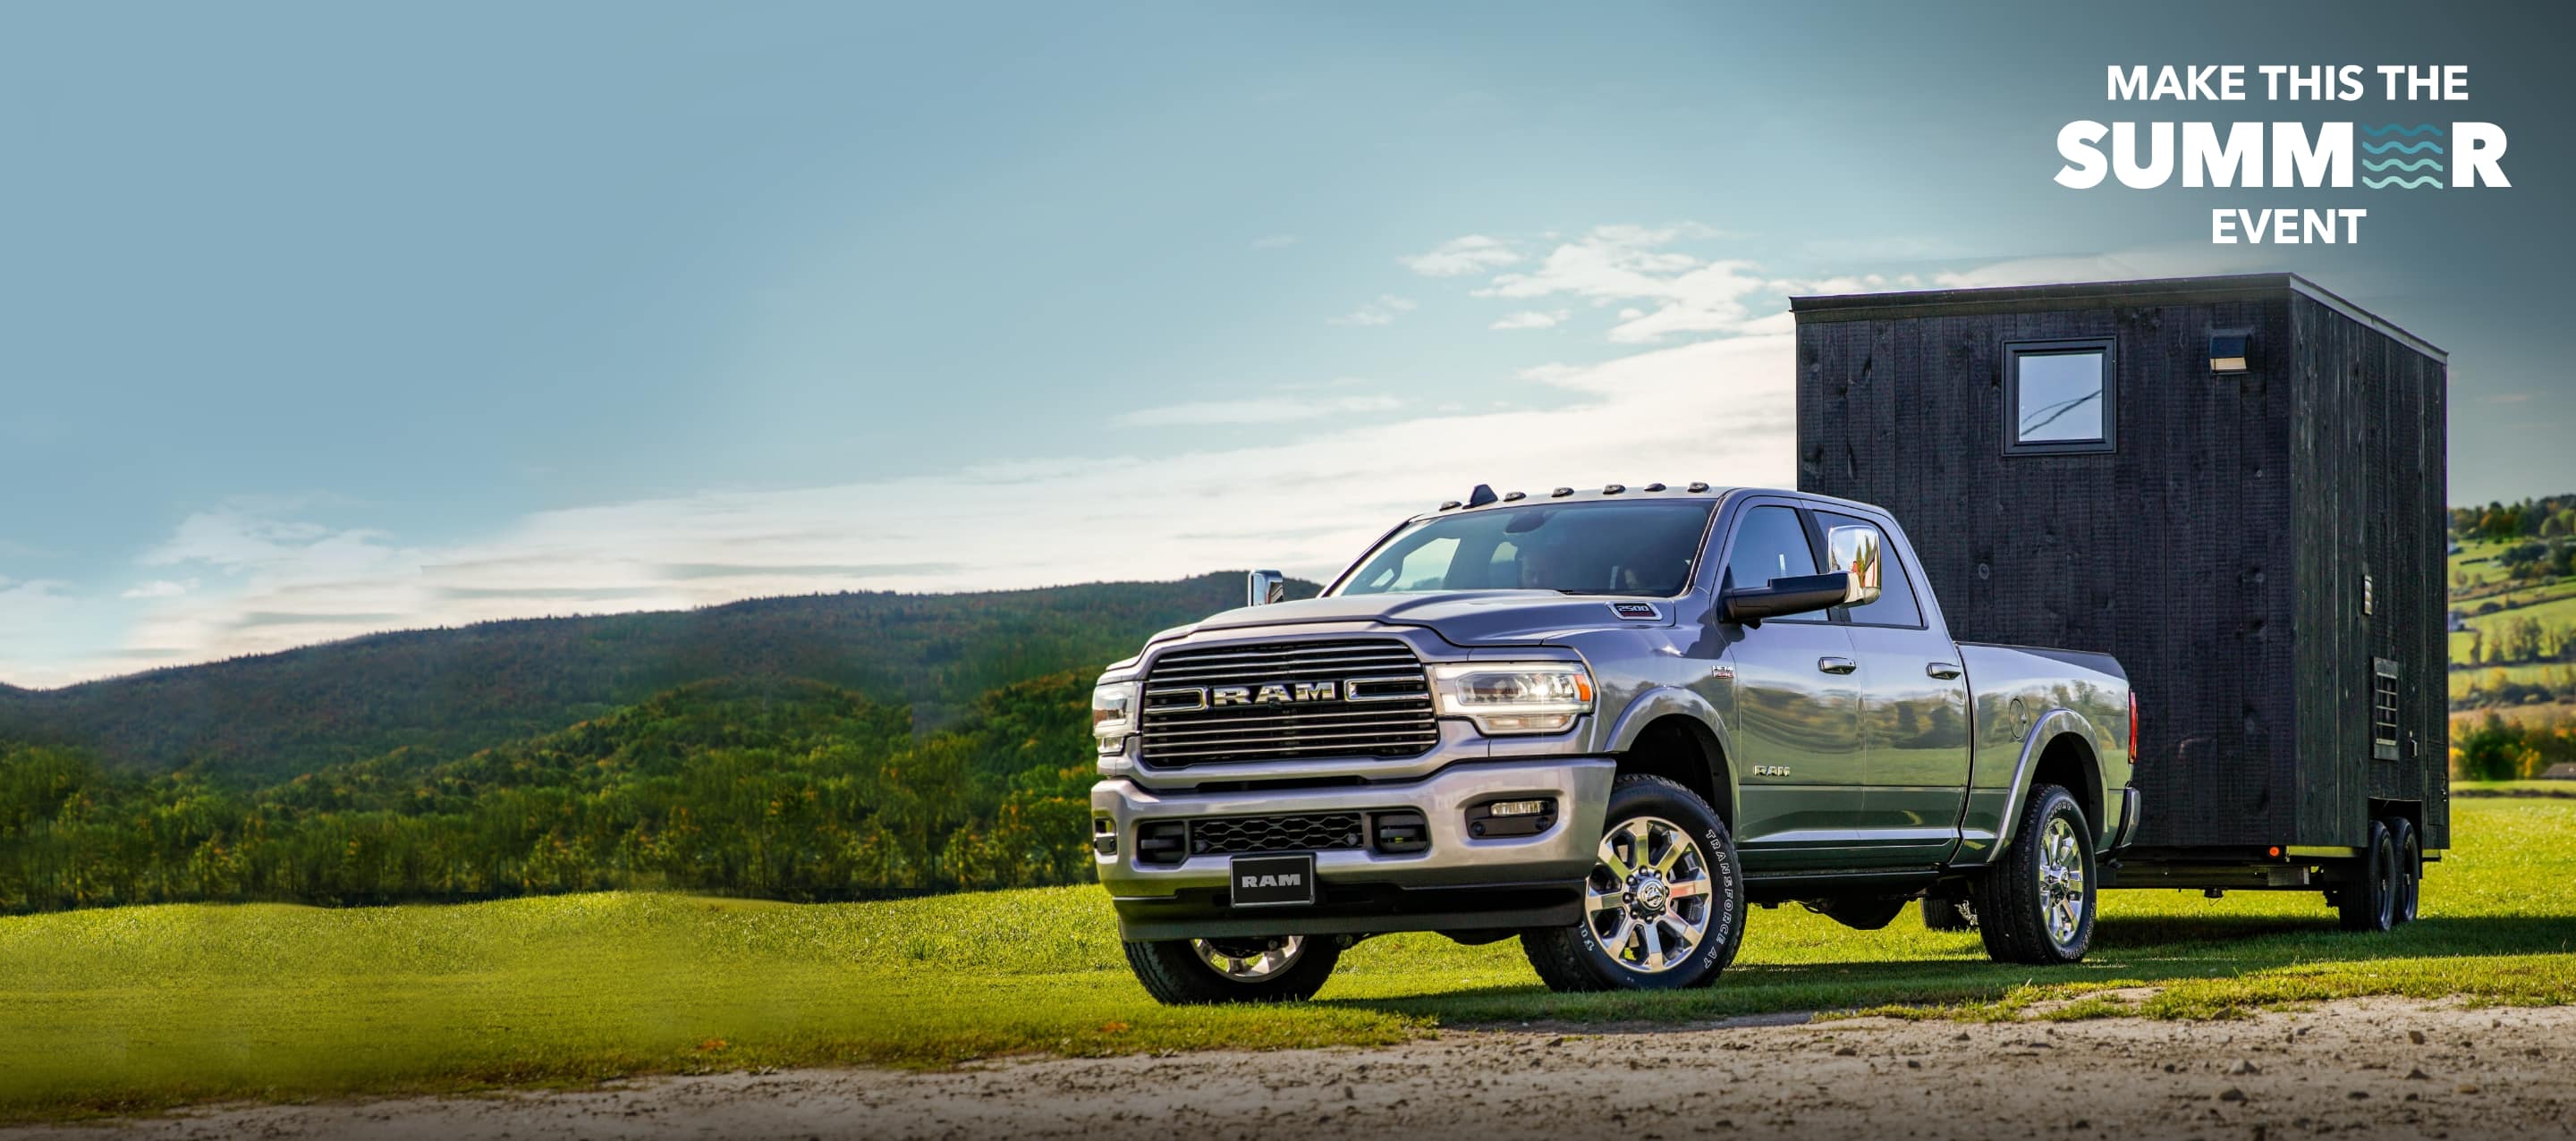 A 2022 Ram 2500 Laramie Crew Cab towing a small trailer down a country road. Make This The Summer Event.